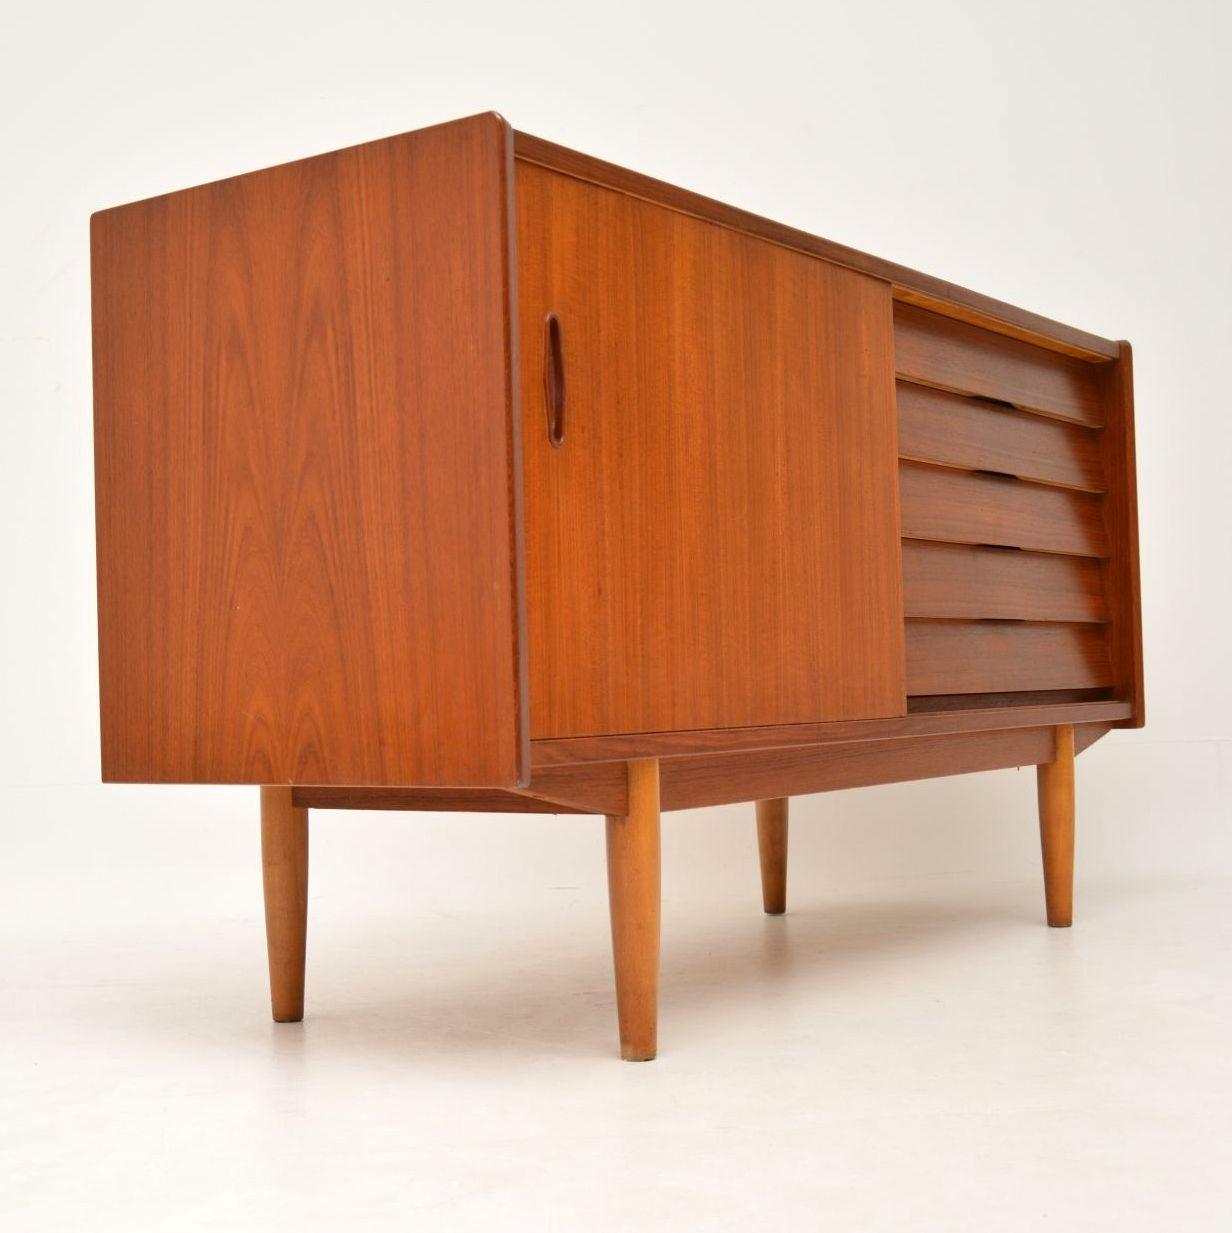 A beautifully made and compact vintage teak sideboard, this was made in Sweden in the 1960s, designed by Nils Jonsson for Troeds. It’s of amazing quality and in excellent condition for its age, with just some minor wear here and there. There are a